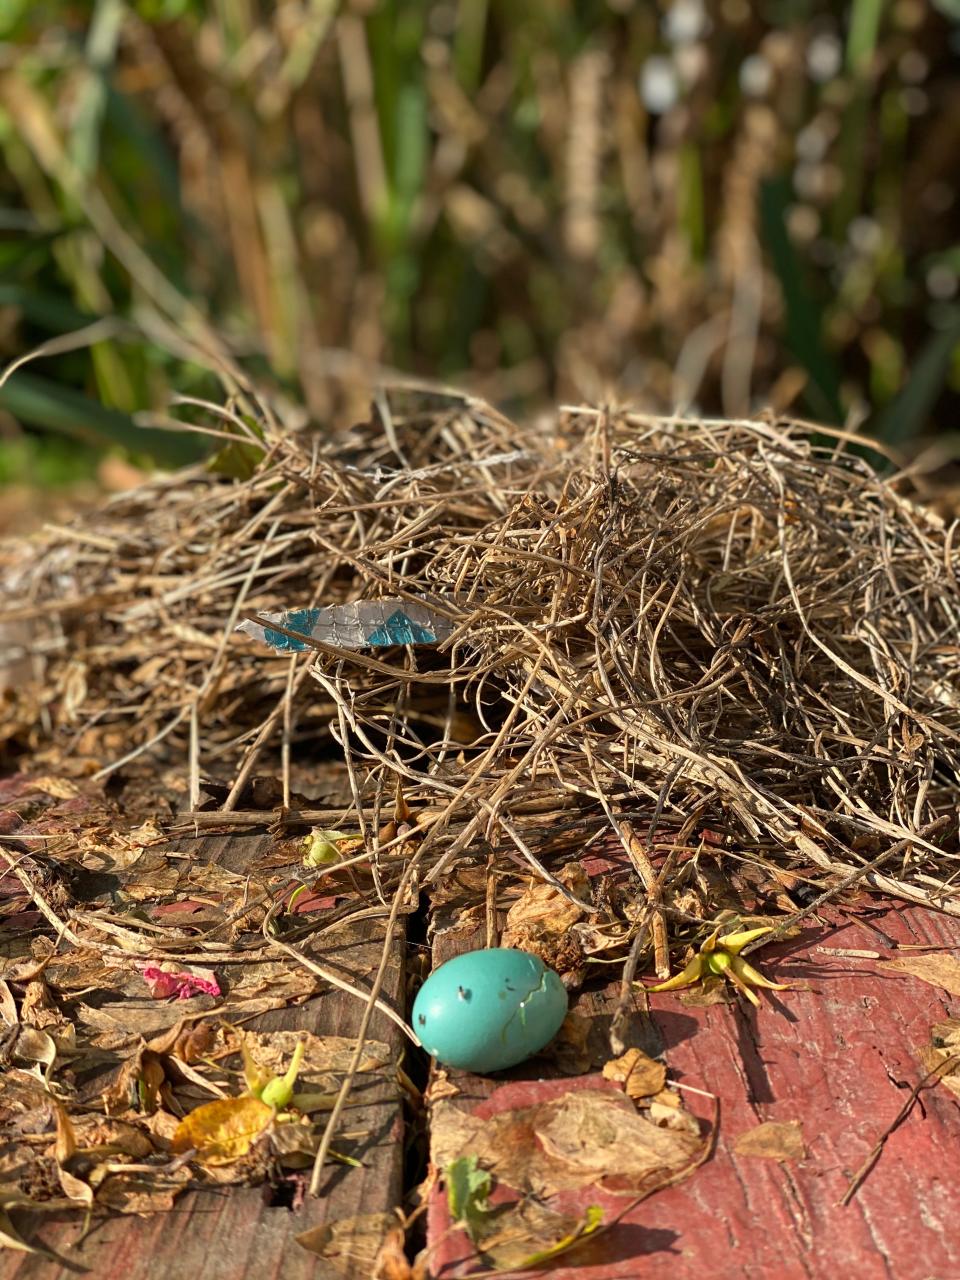 Casualties of the storm - a robin's nest and three eggs were blown out of large rose bush in Williston during a thunderstorm July 8, 2020.